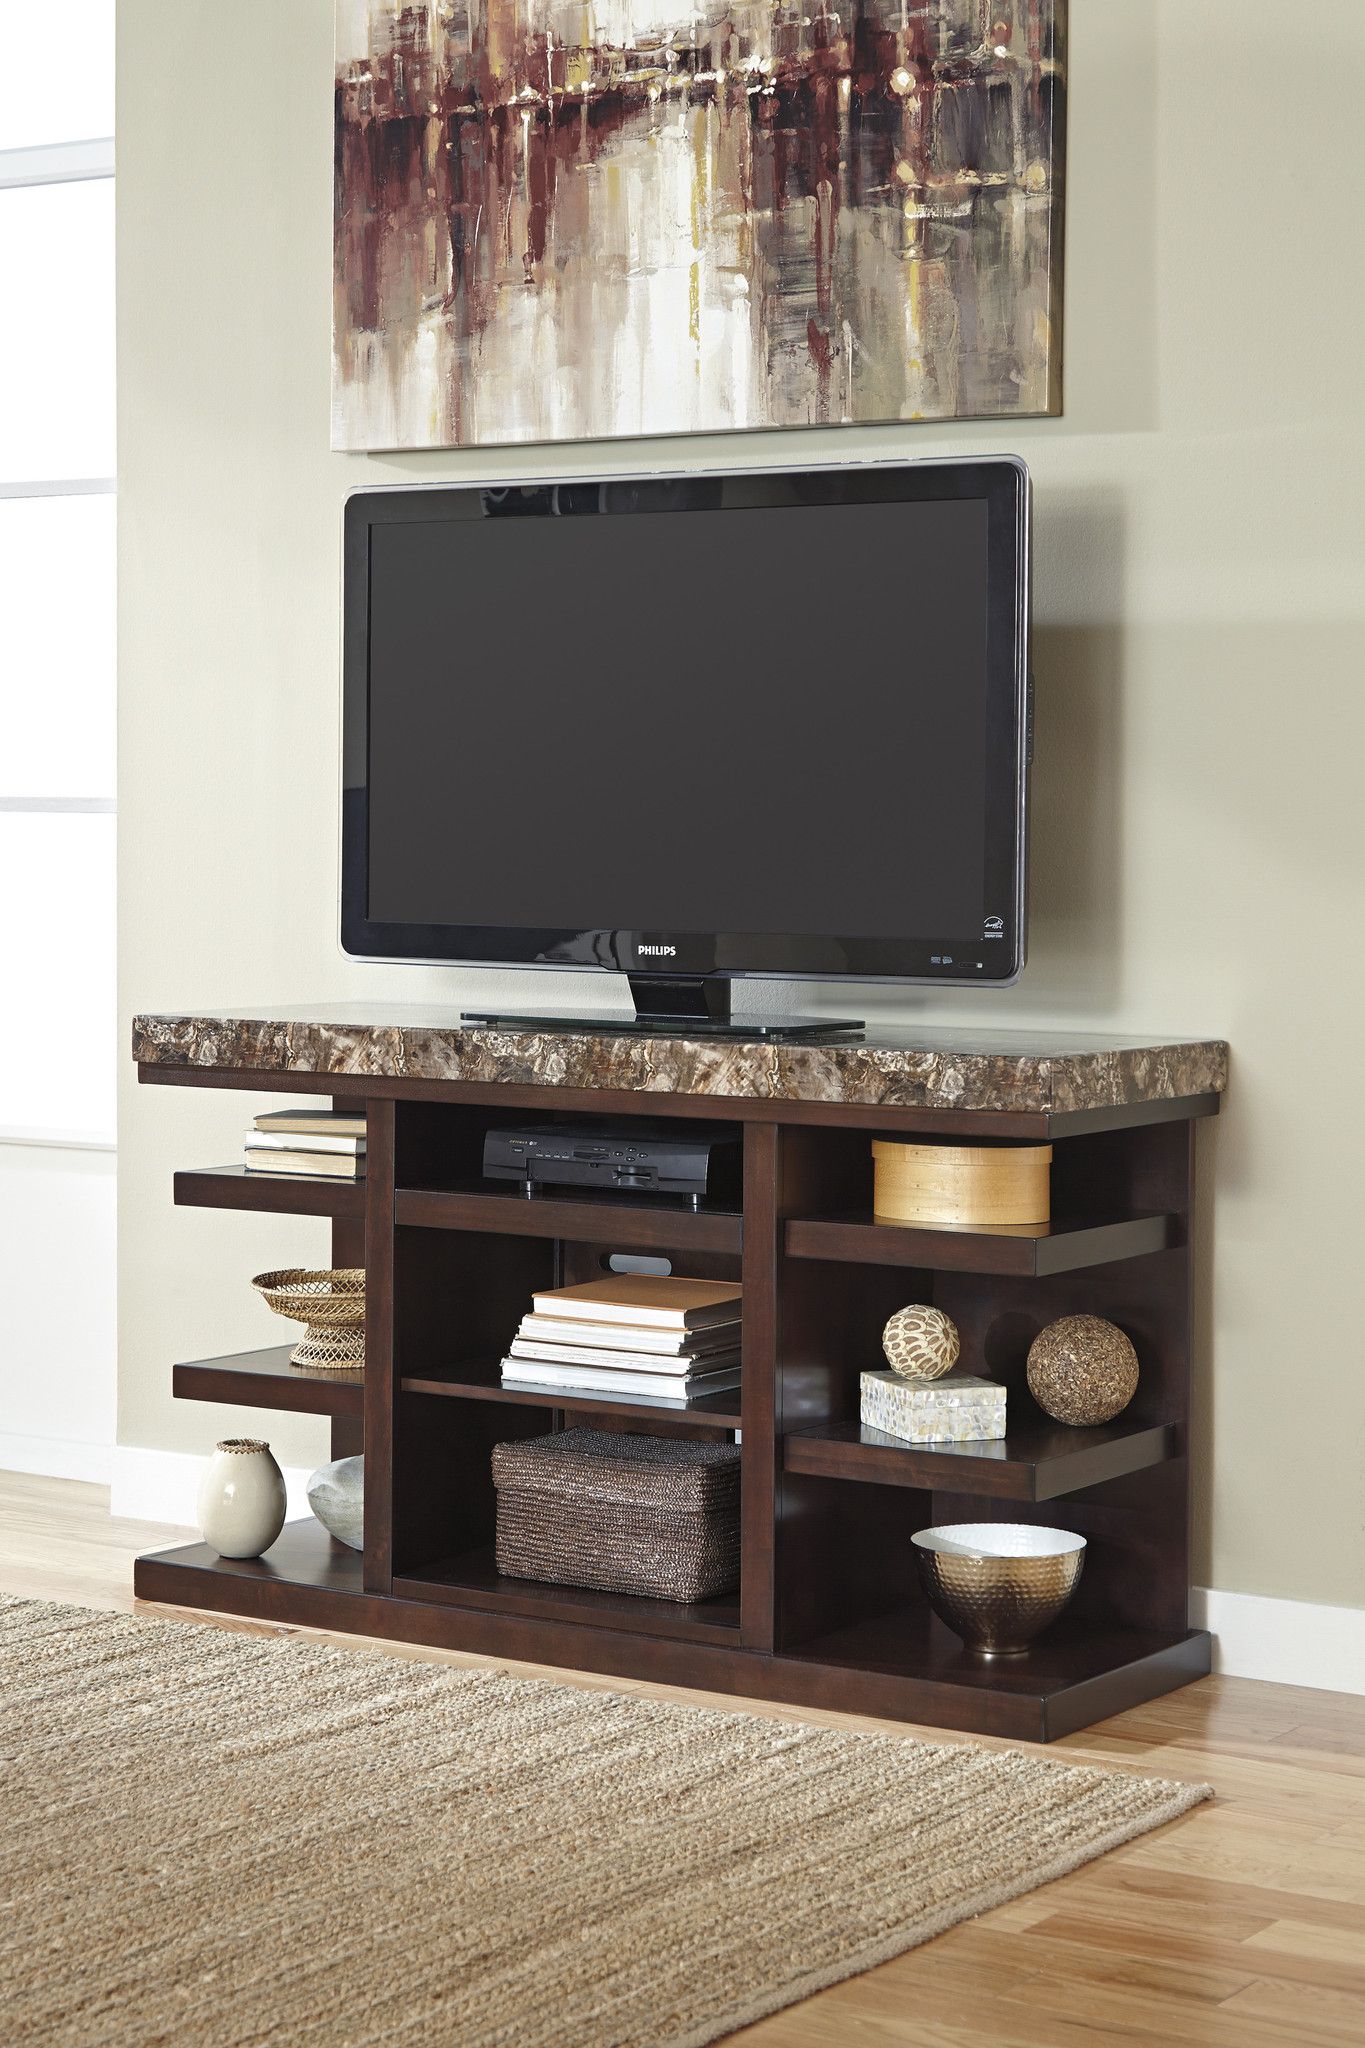 Tv Stands for Flat Screens with Fireplace Unique Kraleene Lg Tv Stand W Fireplace Option